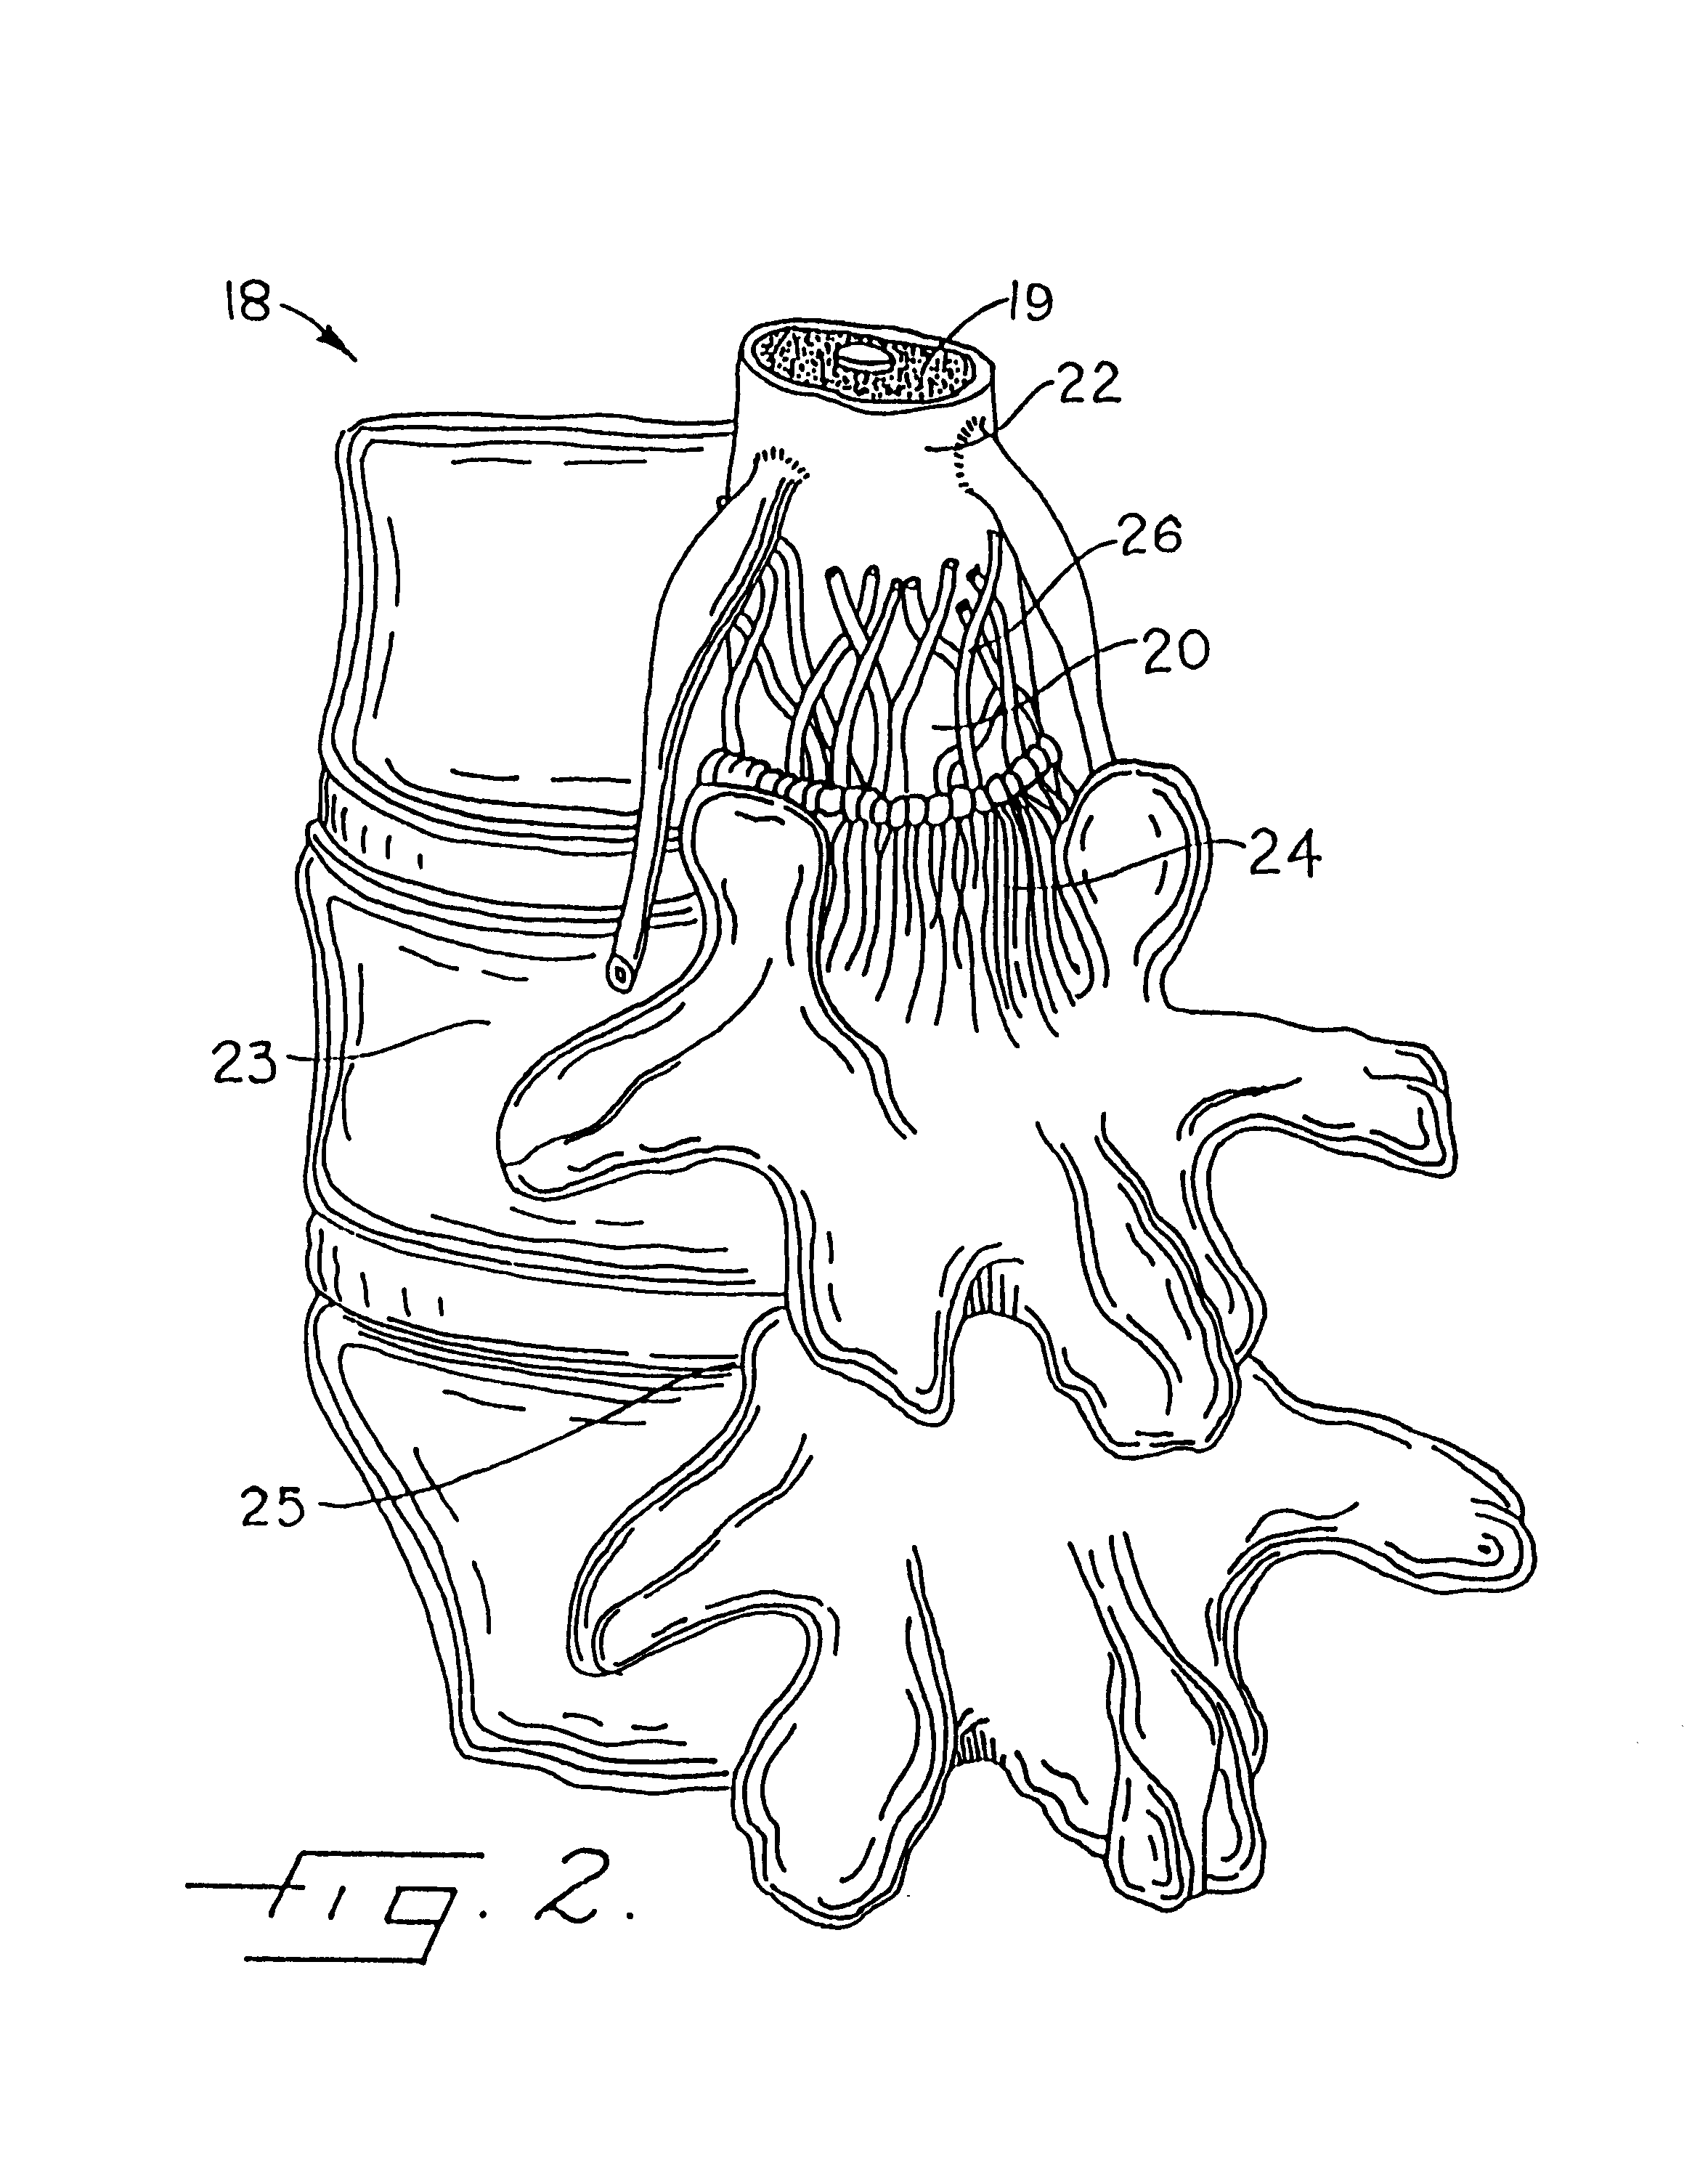 System for enhancing visibility in the epidural space